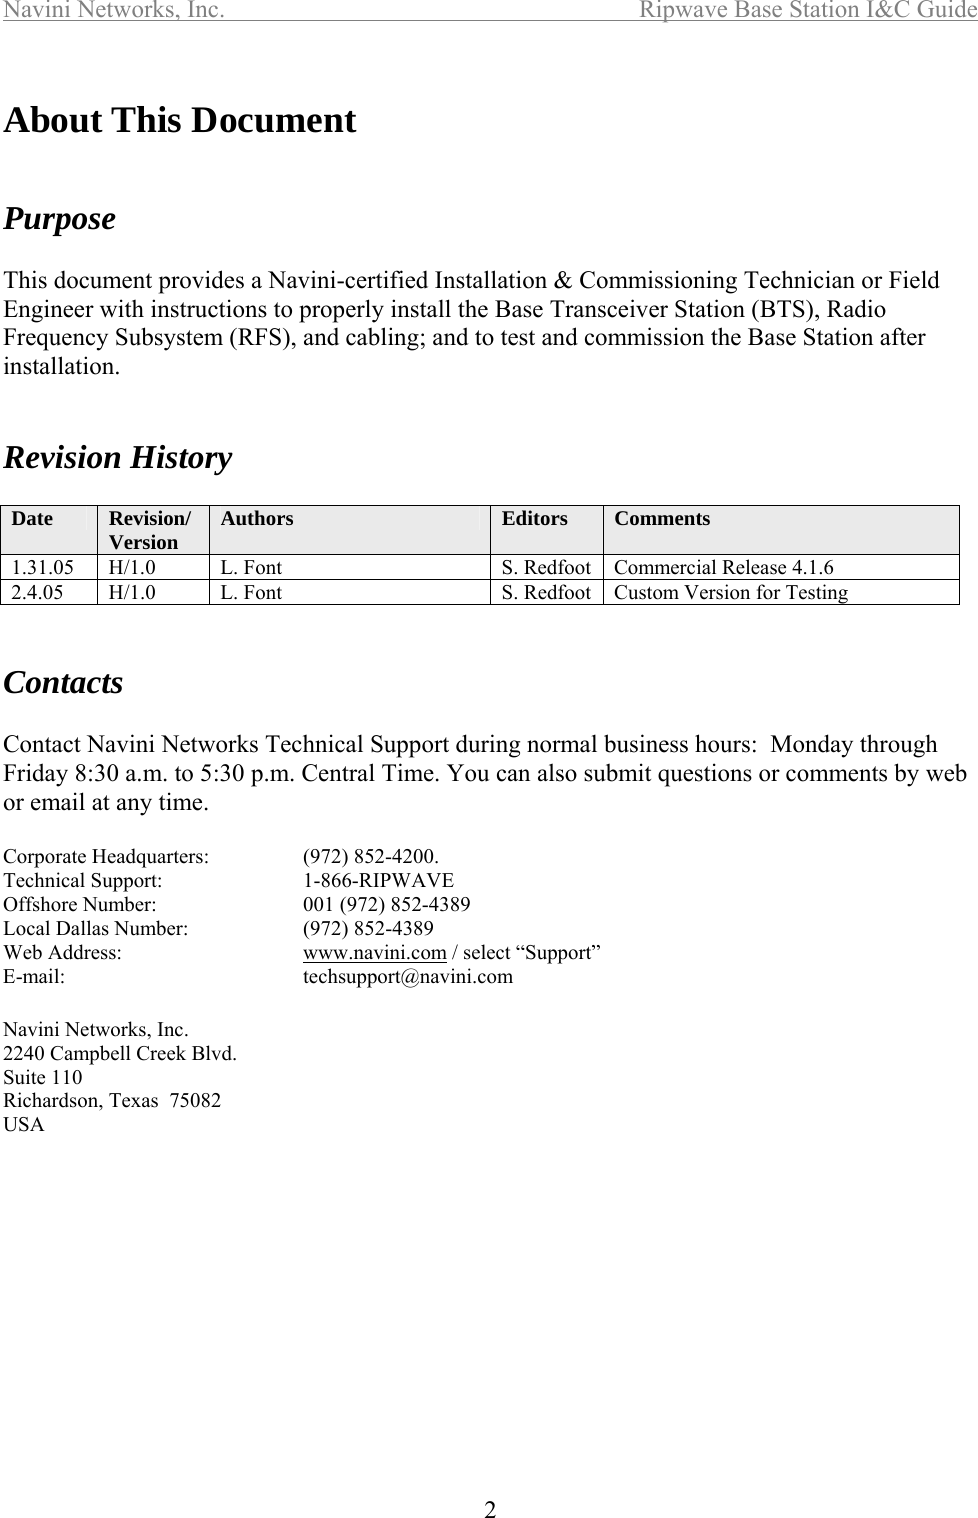 Navini Networks, Inc.  Ripwave Base Station I&amp;C Guide  2  About This Document     Purpose  This document provides a Navini-certified Installation &amp; Commissioning Technician or Field Engineer with instructions to properly install the Base Transceiver Station (BTS), Radio Frequency Subsystem (RFS), and cabling; and to test and commission the Base Station after installation.    Revision History  Date  Revision/Version  Authors  Editors  Comments 1.31.05  H/1.0  L. Font  S. Redfoot  Commercial Release 4.1.6 2.4.05  H/1.0  L. Font  S. Redfoot  Custom Version for Testing   Contacts  Contact Navini Networks Technical Support during normal business hours:  Monday through Friday 8:30 a.m. to 5:30 p.m. Central Time. You can also submit questions or comments by web or email at any time.  Corporate Headquarters:    (972) 852-4200.   Technical Support:    1-866-RIPWAVE Offshore Number:    001 (972) 852-4389 Local Dallas Number:    (972) 852-4389 Web Address:   www.navini.com / select “Support” E-mail:    techsupport@navini.com  Navini Networks, Inc. 2240 Campbell Creek Blvd. Suite 110 Richardson, Texas  75082 USA 